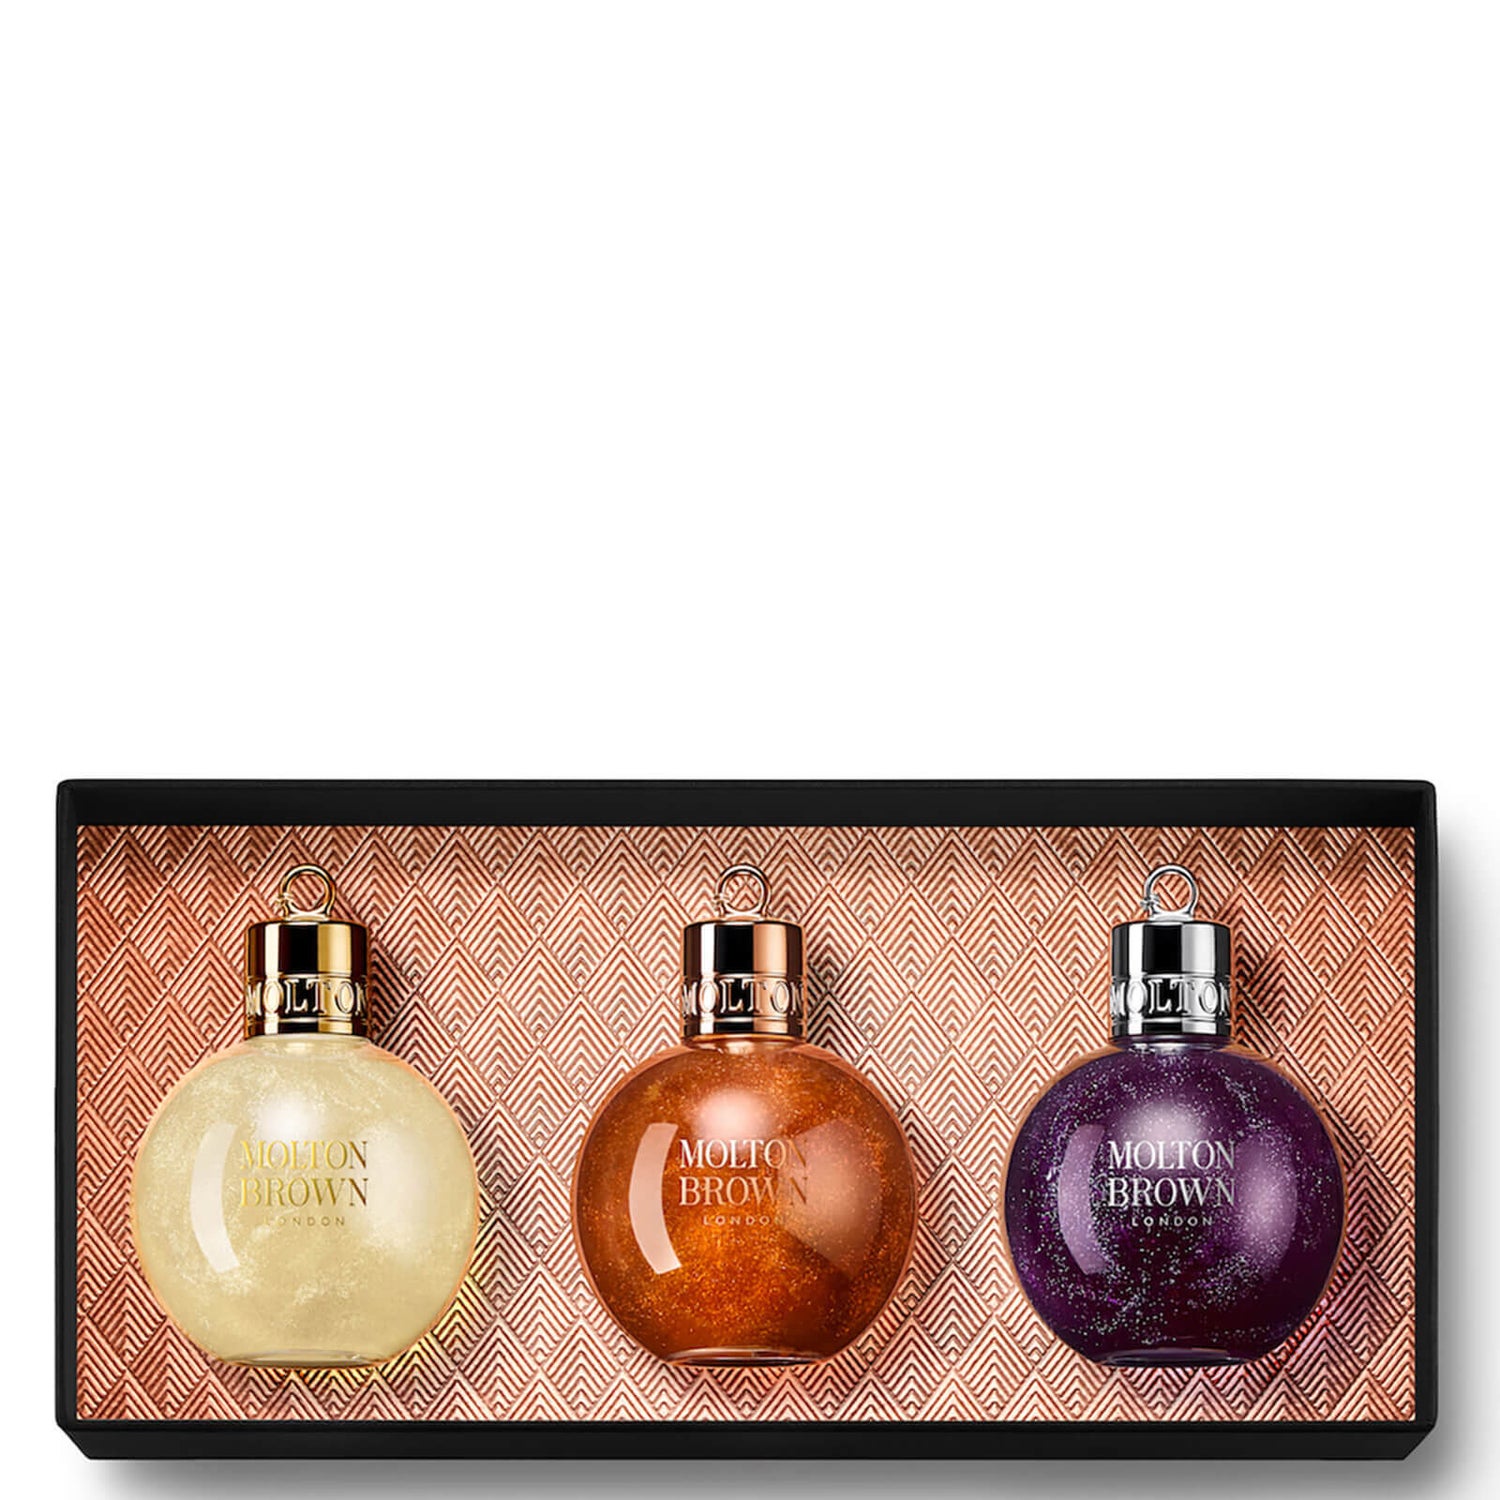 Molton Brown Festive Bauble Gift Set (Worth $80.00)